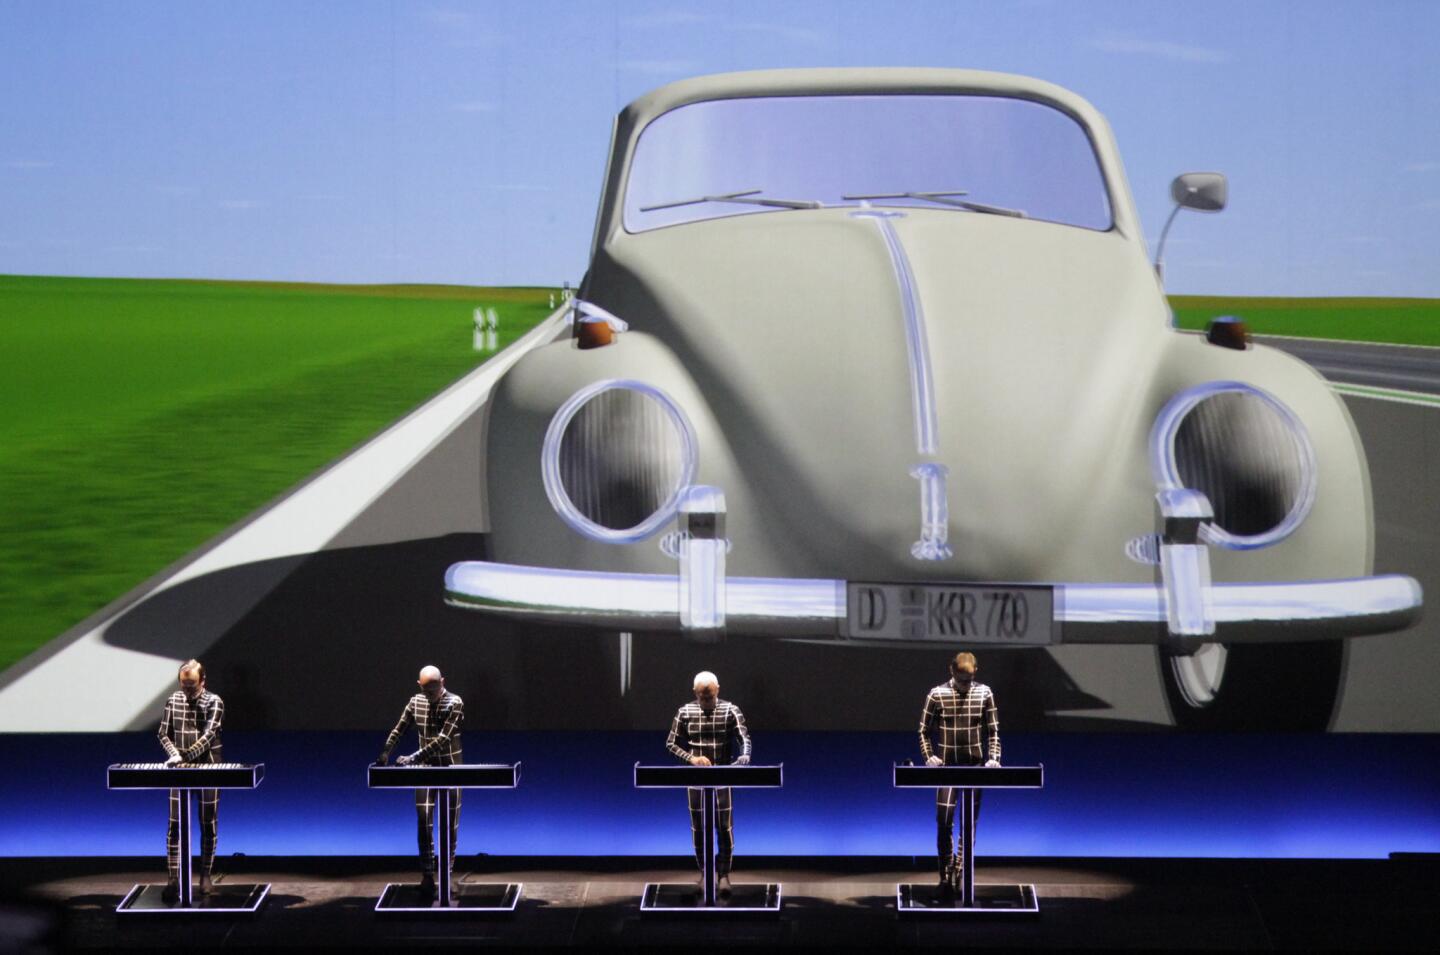 Identically dressed members of Kraftwerk perform their album "Autobahn" at Walt Disney Concert Hall in Los Angeles on March 18, 2014. 3-D glasses are needed to truly appreciate the graphics behind band members.